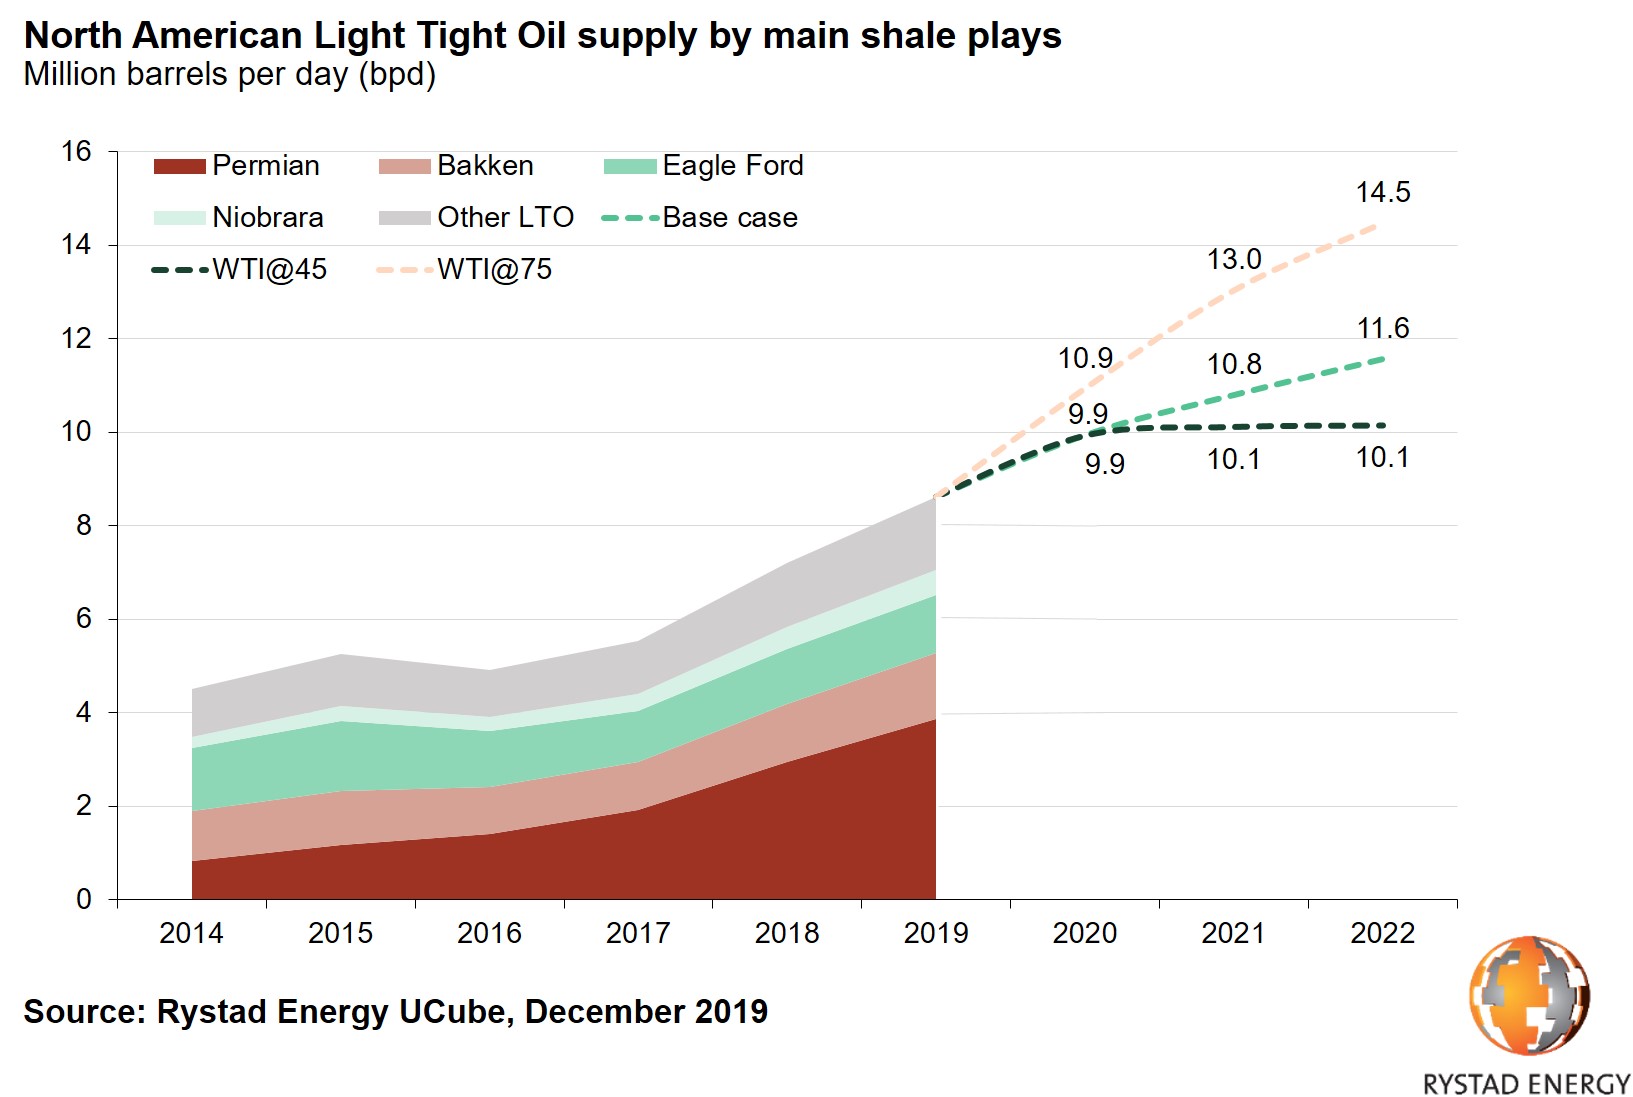 20191204_PR Chart 1 North American Light tight oil supply by main shale plays.jpg